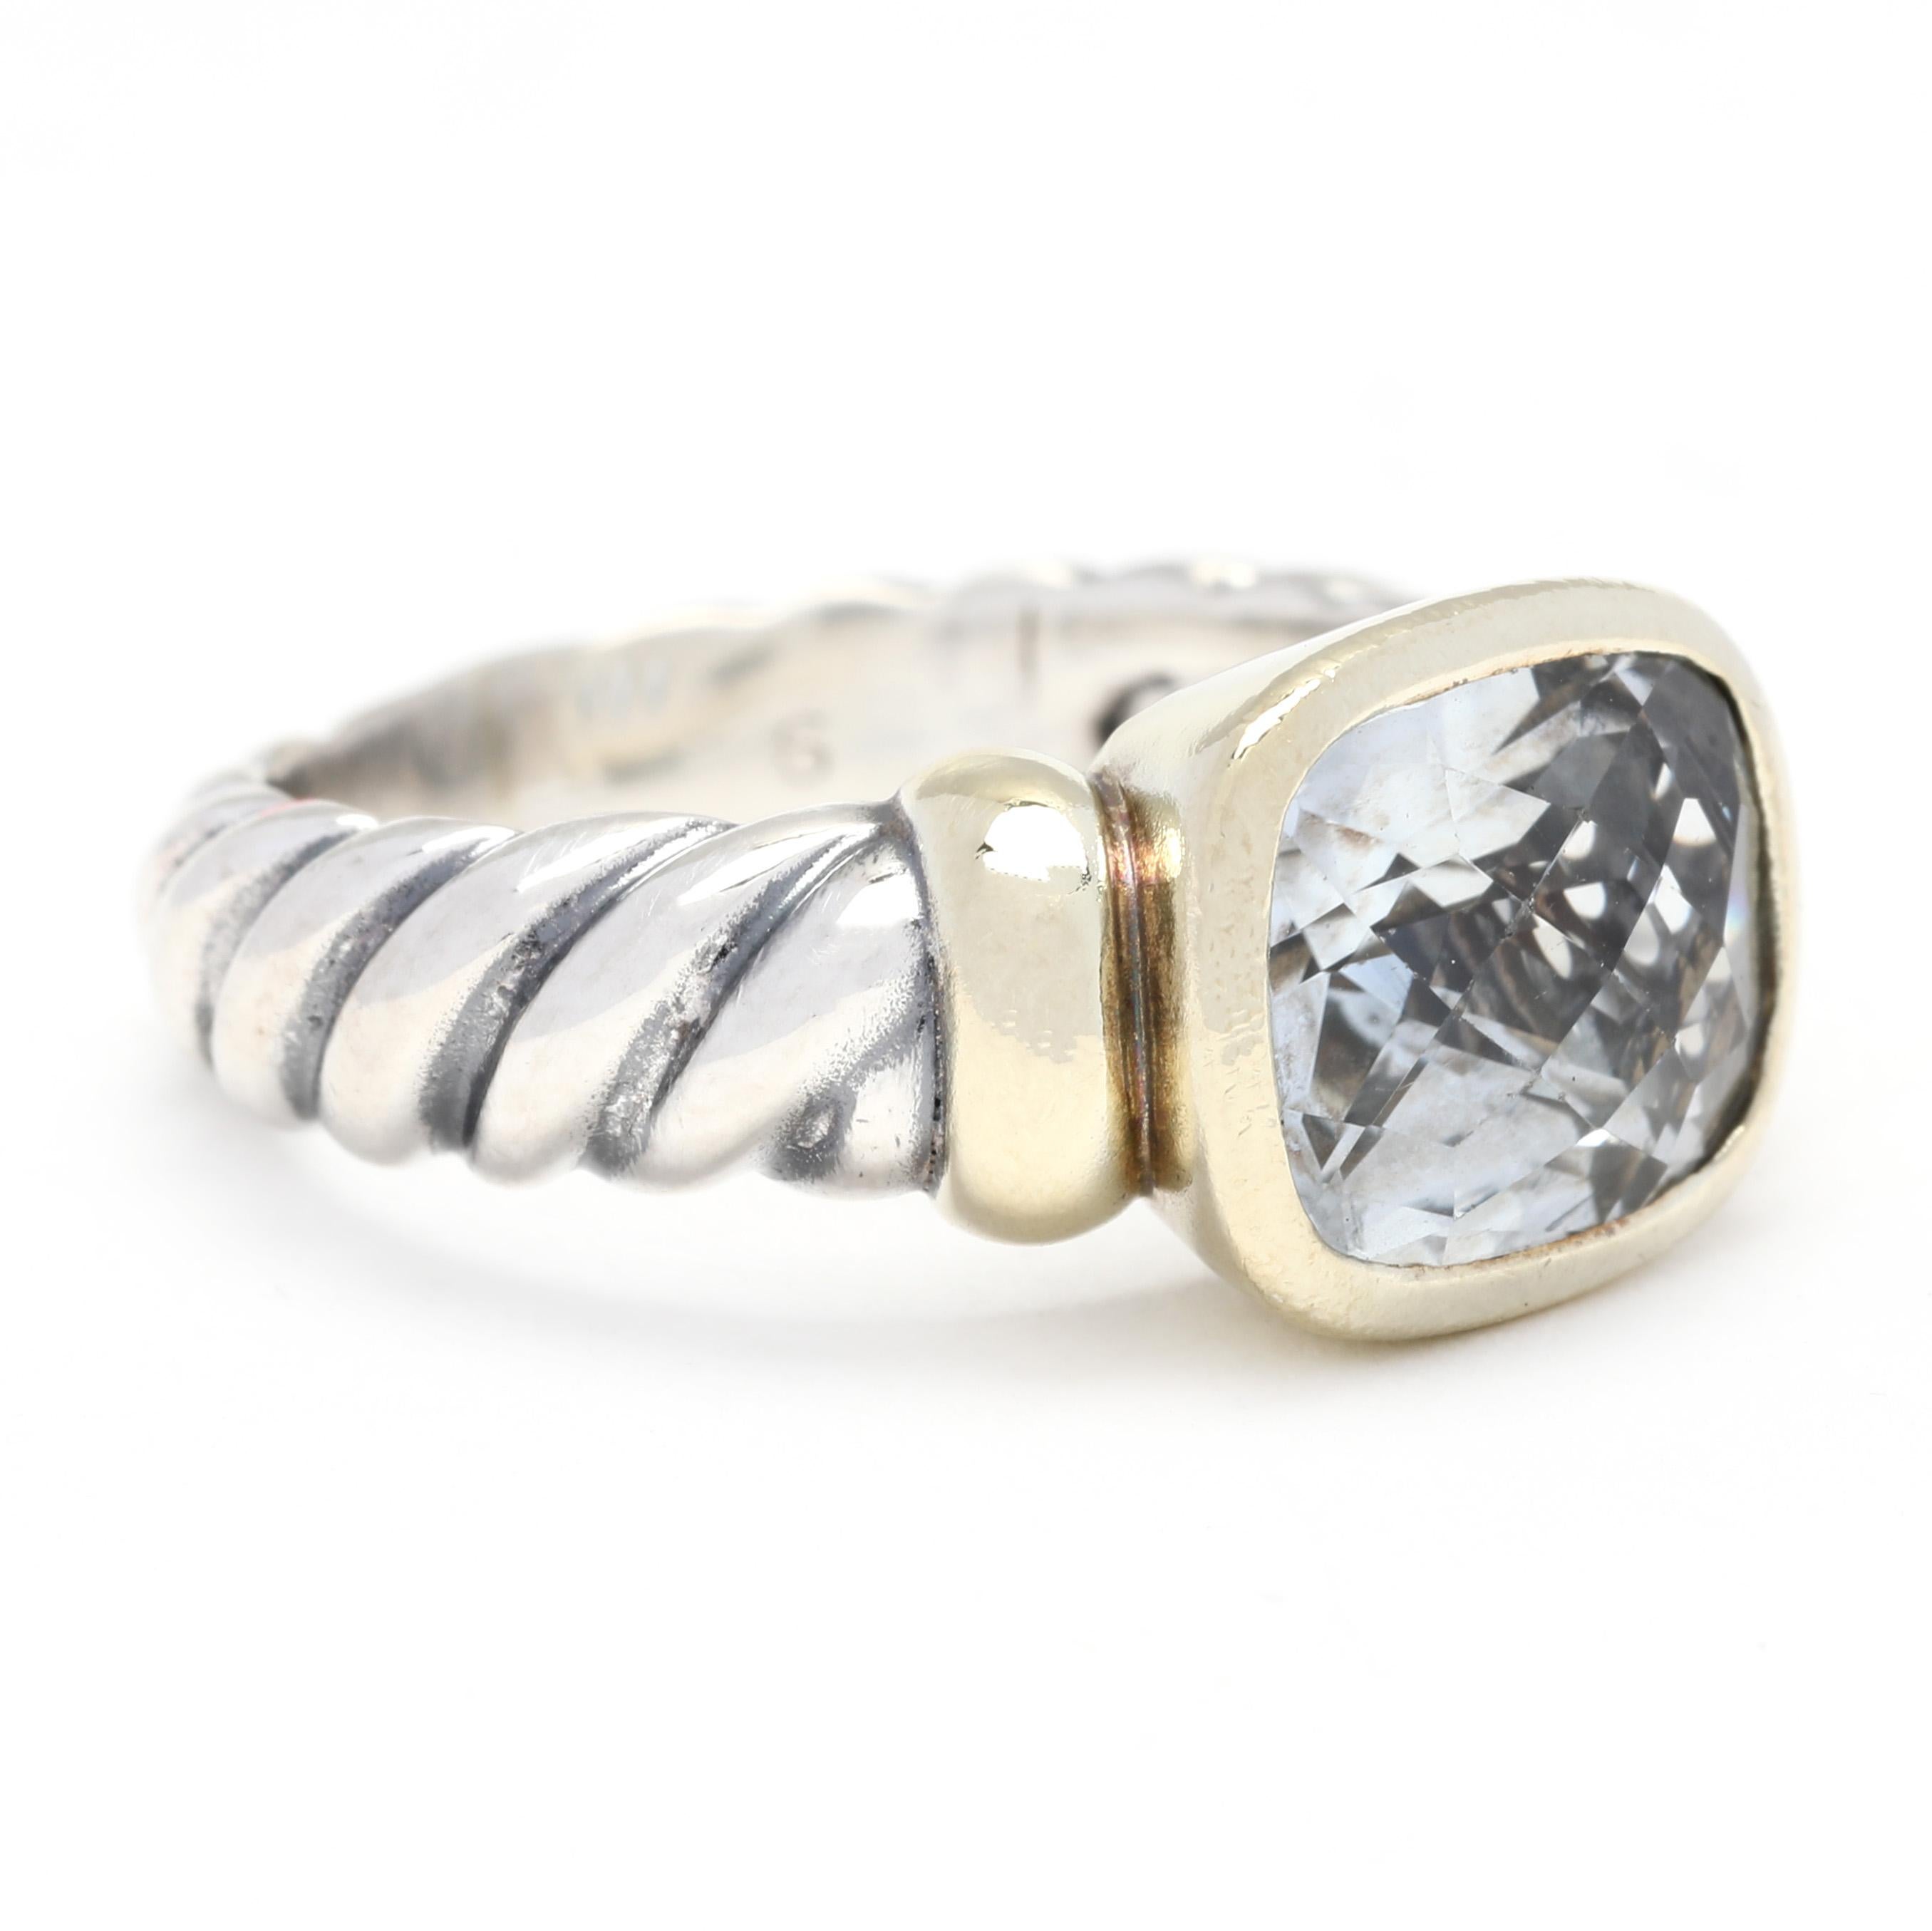 This stunning David Yurman Noblesse Prasiolite ring is crafted from 14k yellow gold, sterling silver, and prasiolite (green amethyst). The ring features delicate sterling silver cable wrap that wraps around the prasiolite center. The ring is the